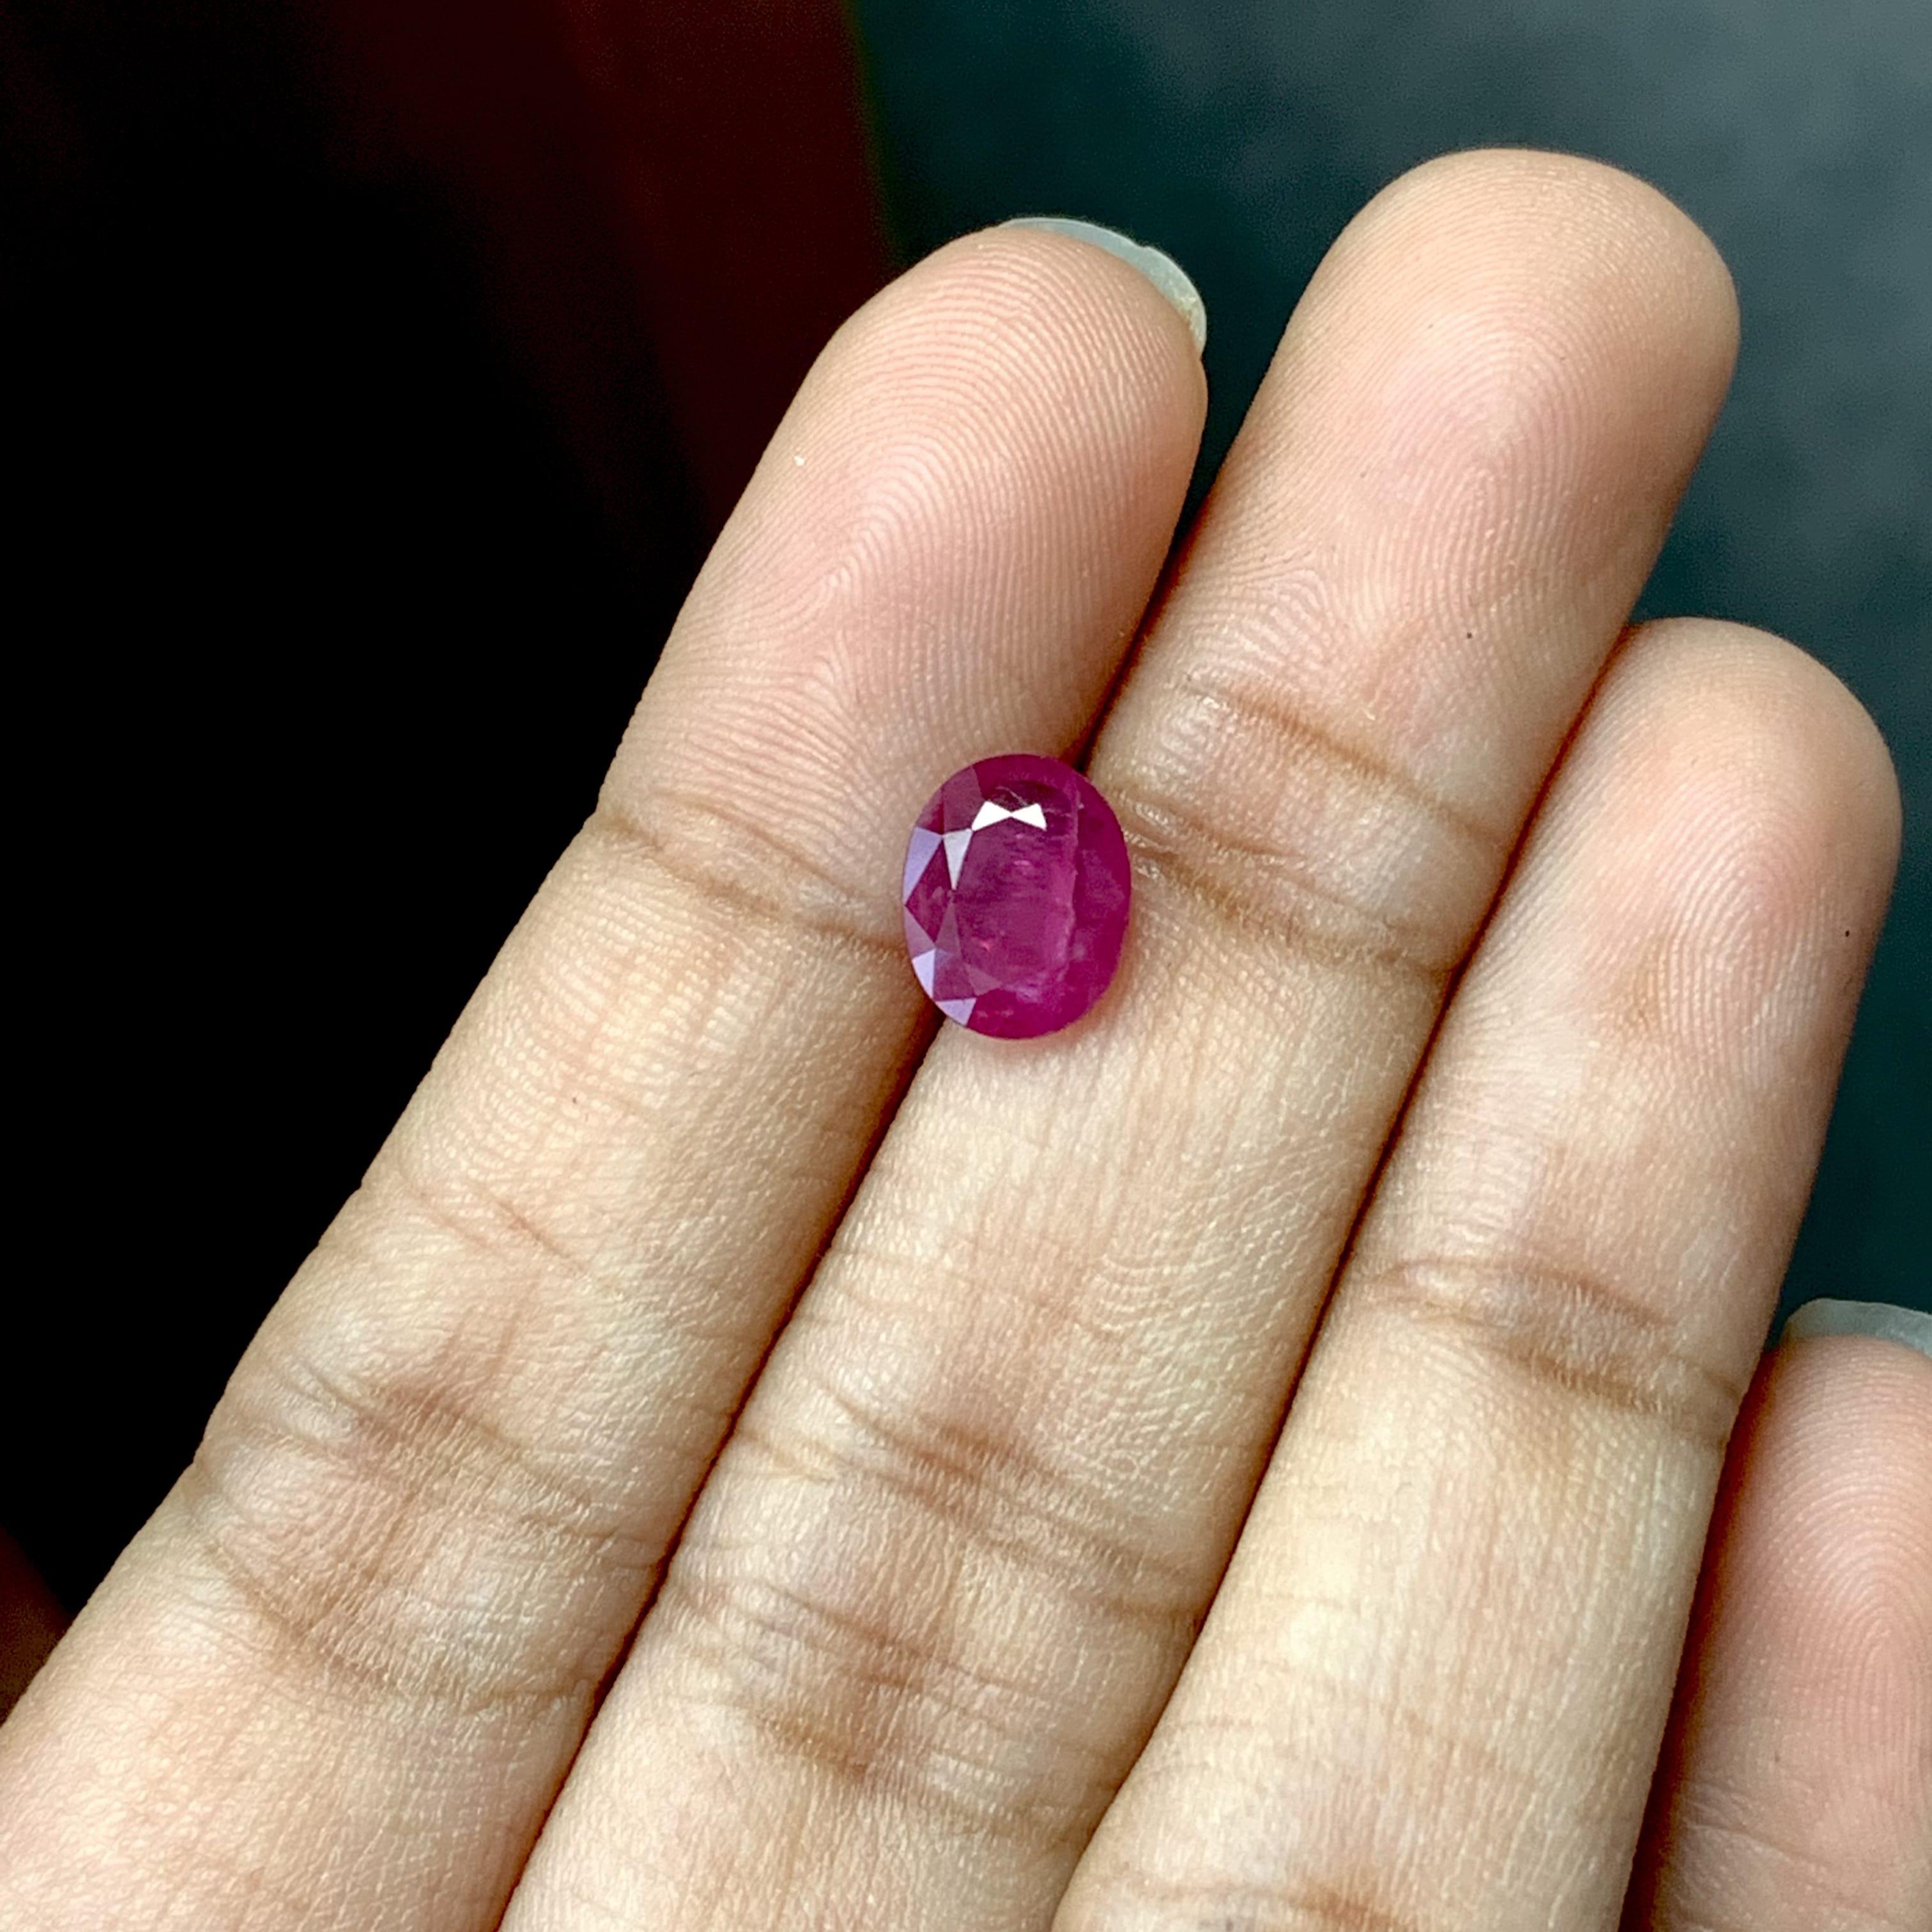 No-Heat 1.44 Carat Oval Cut Natural Ruby Pinkish-Red For Sale 2